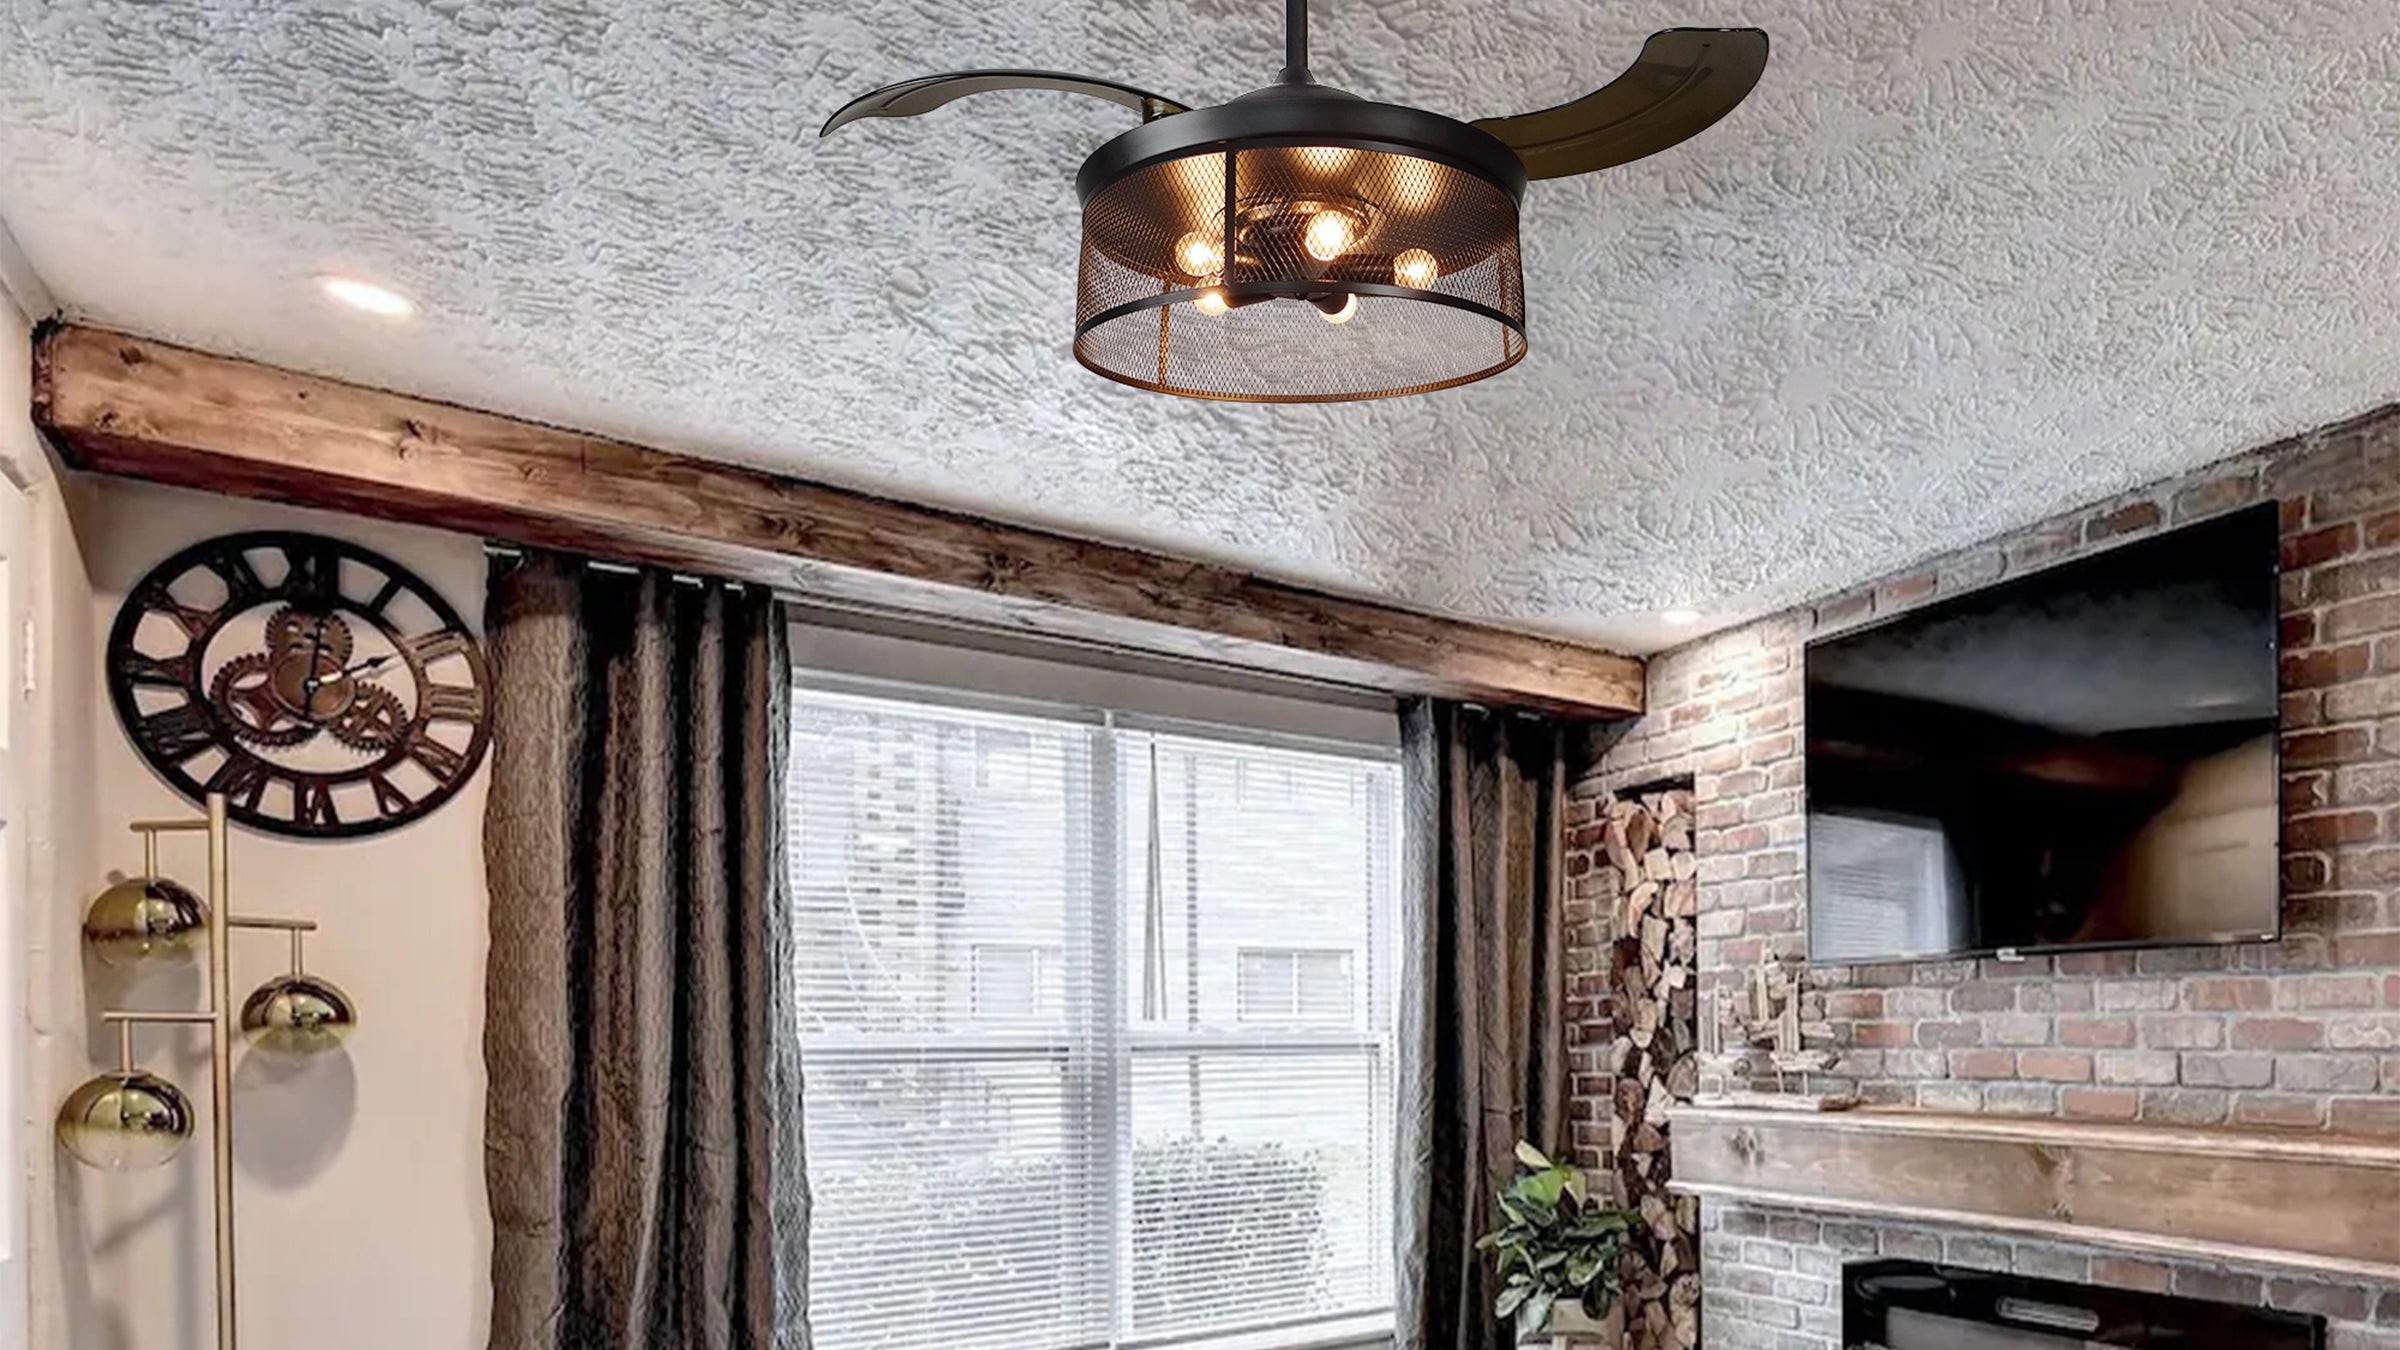 42 inch Ceiling Fans